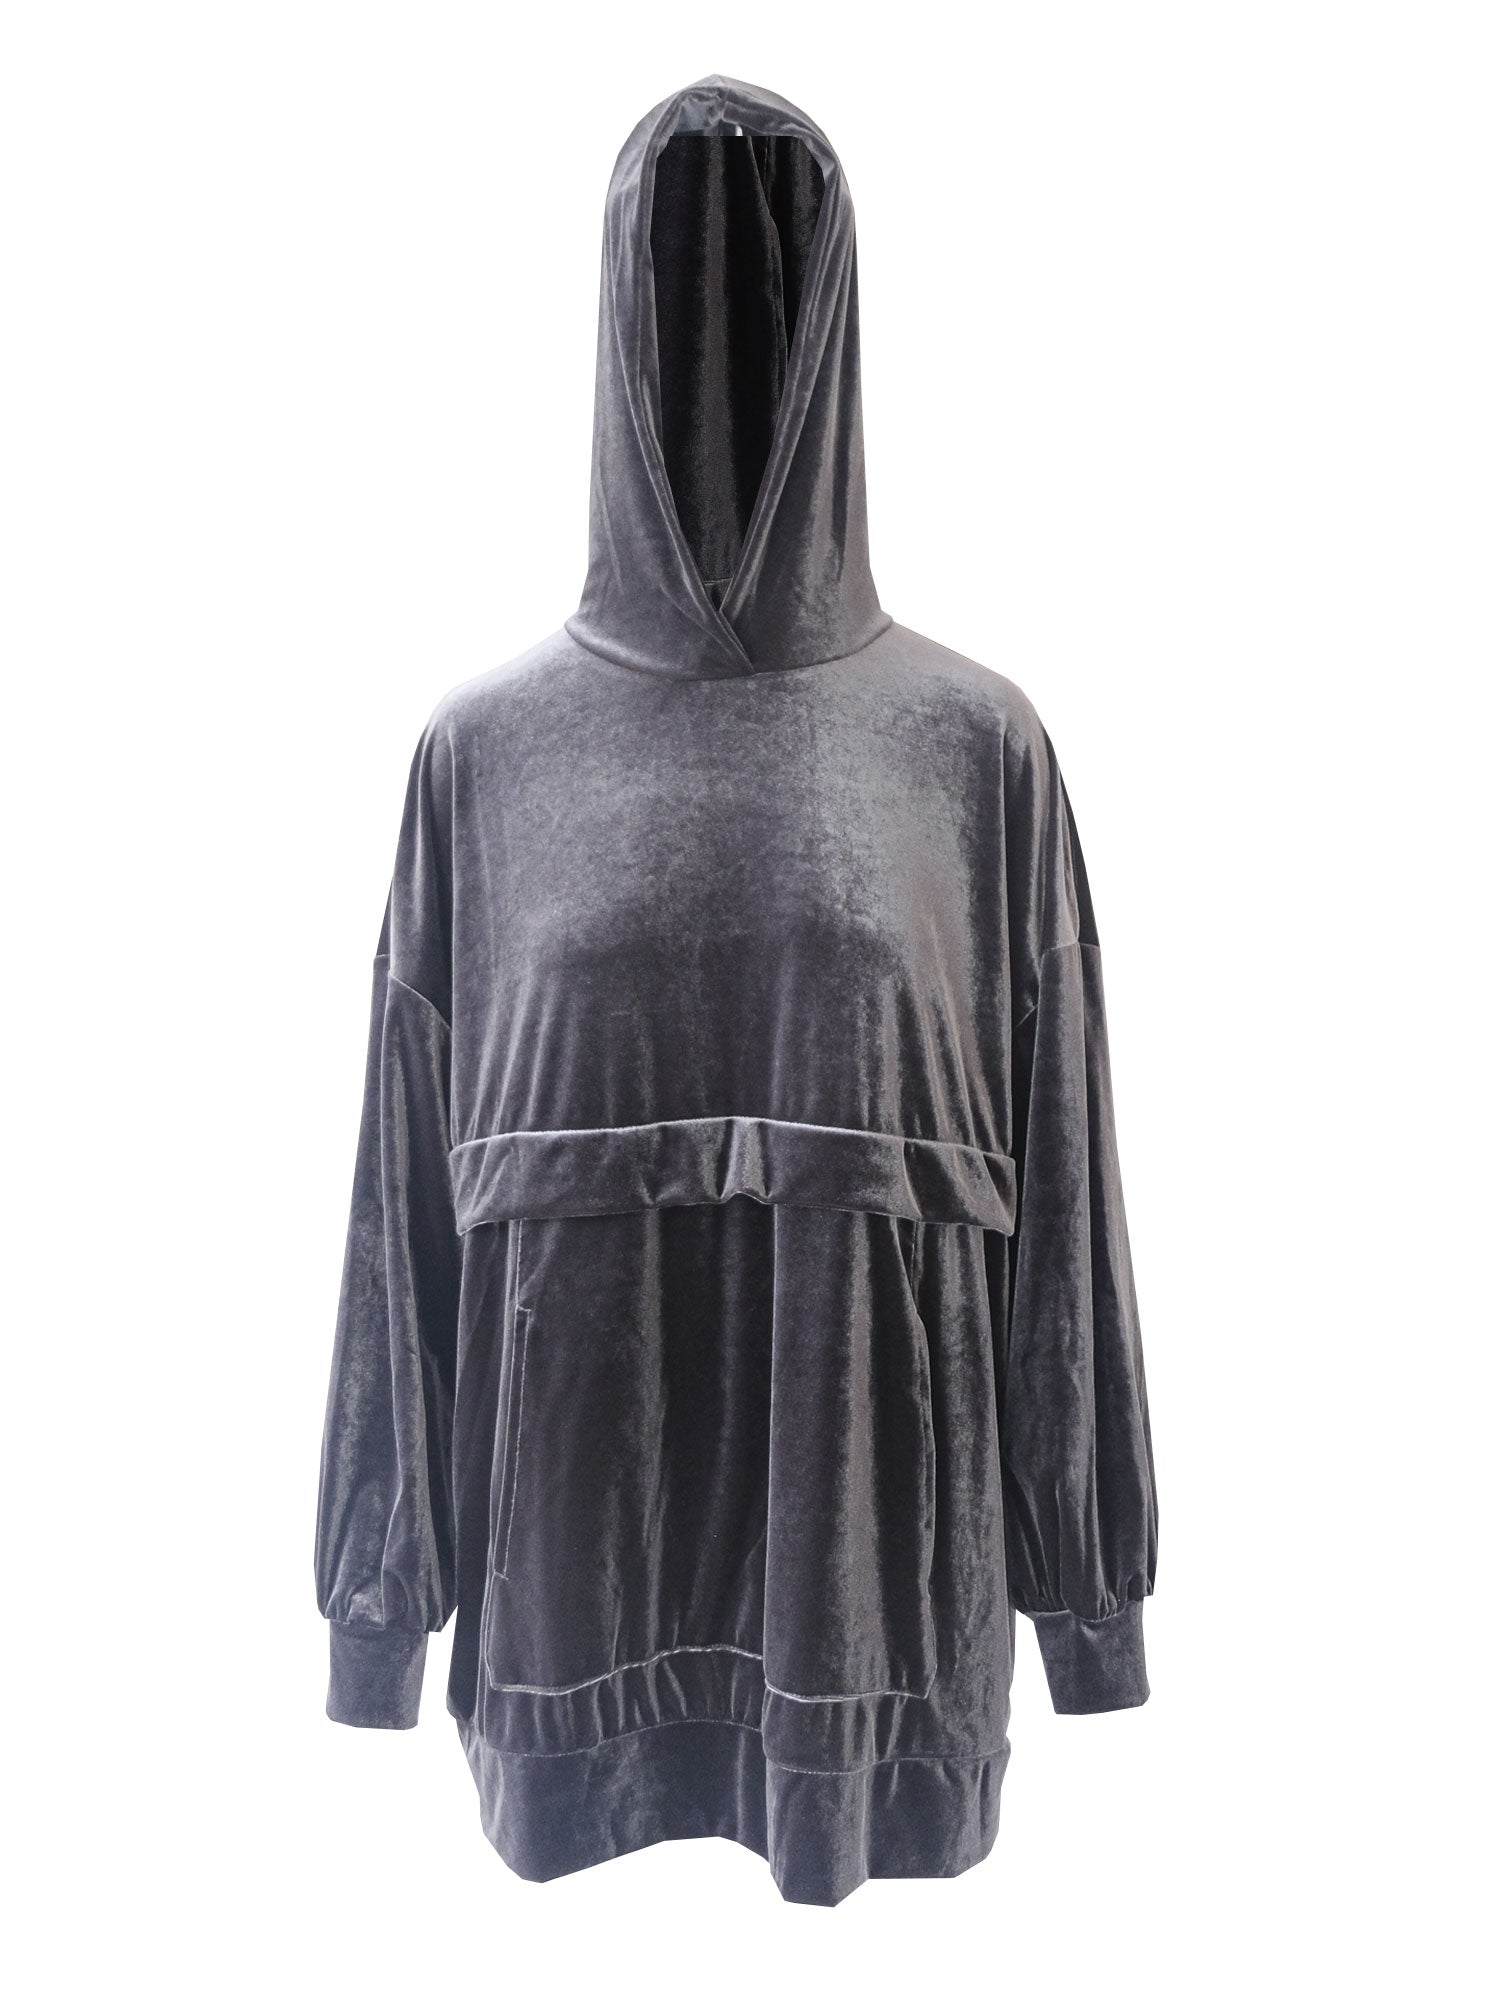 LUCY - hoodie in grey chenille